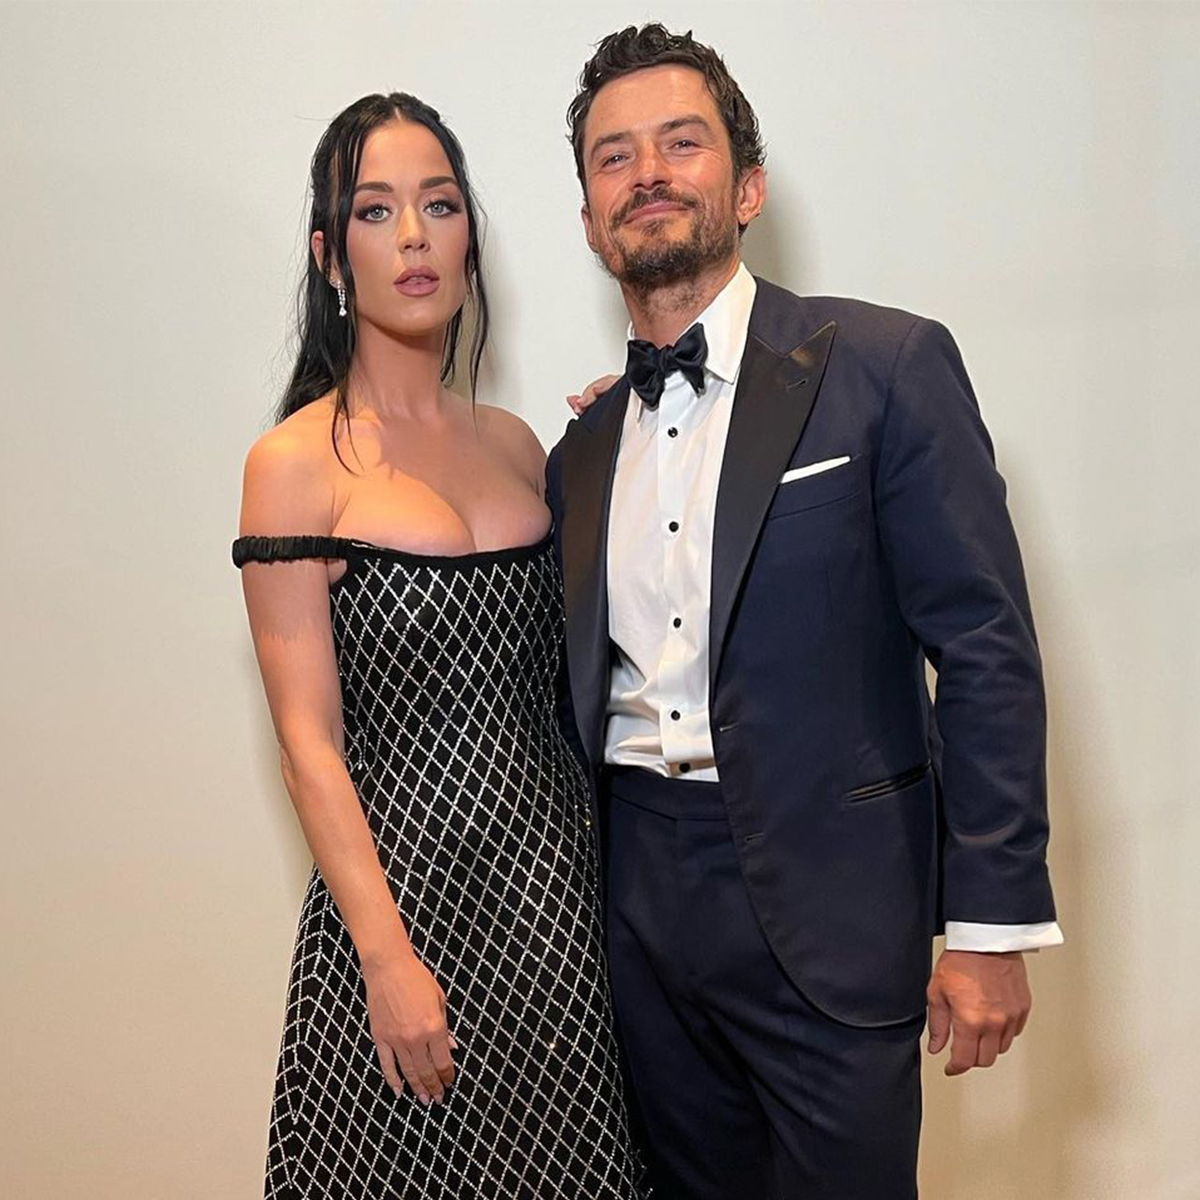 Katy Perry Gives Update on Her Sobriety “Pact” With Orlando Bloom